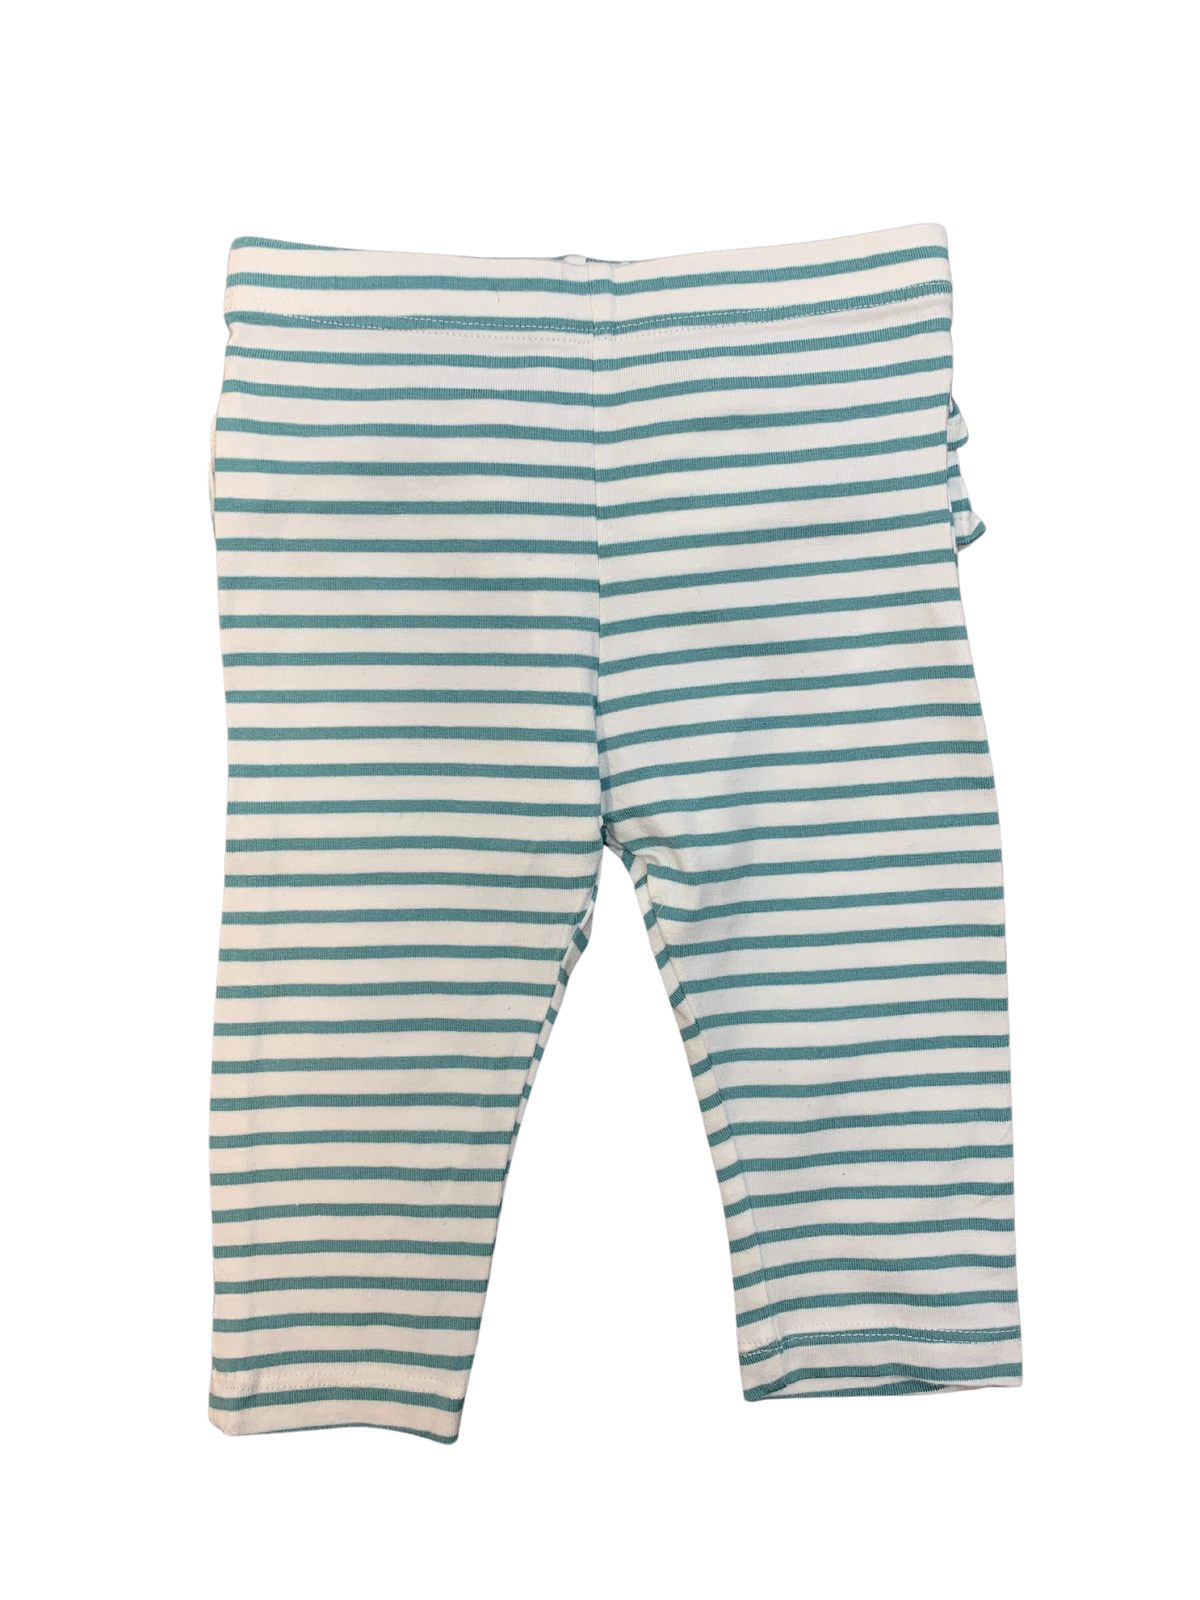 M&S Striped Leggings Baby Girl 3-6 Months/17lbs